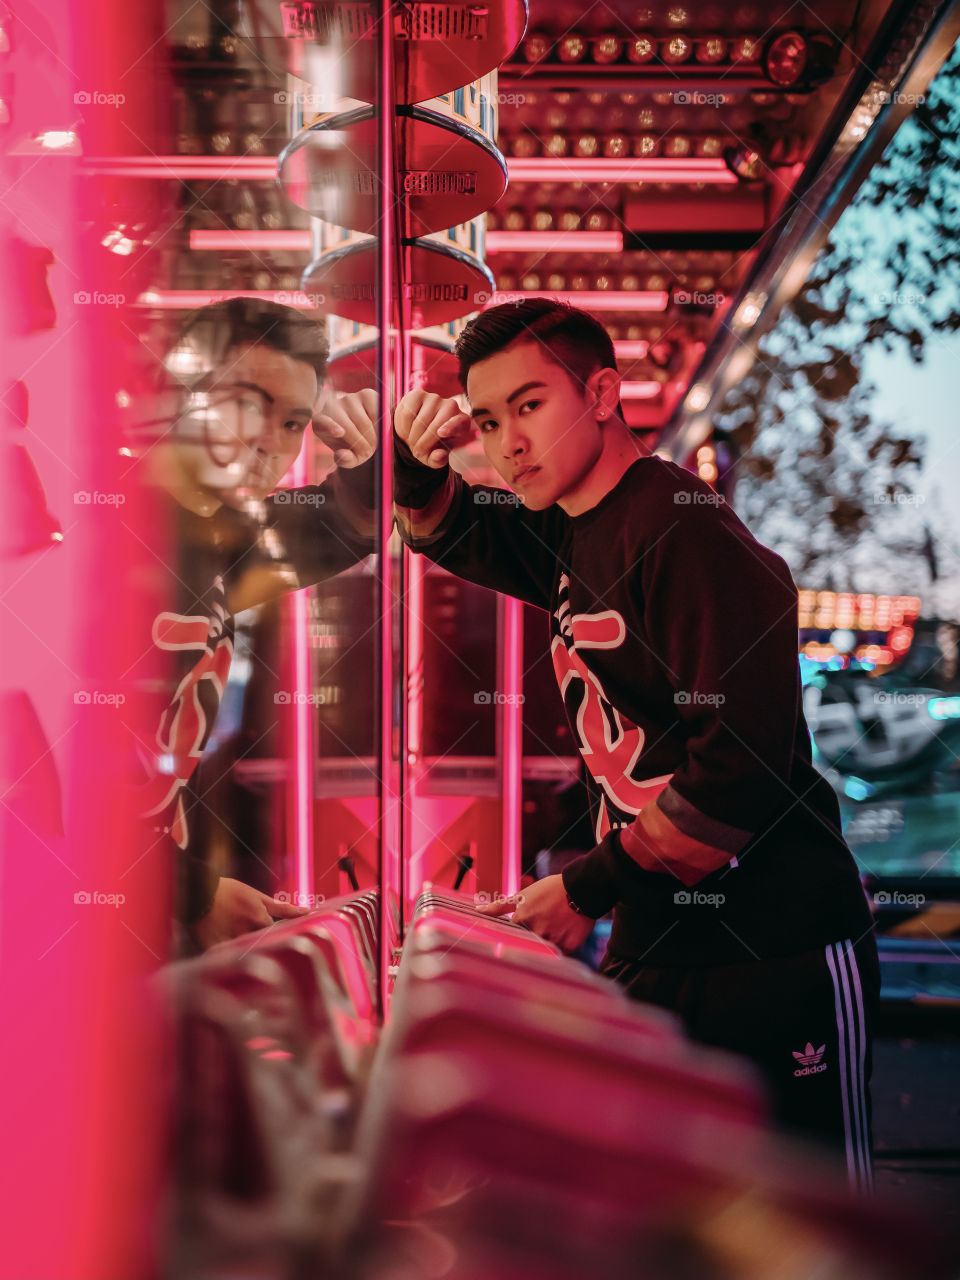 Artistic portrait shot at a game station inside a carnival with red colour theme